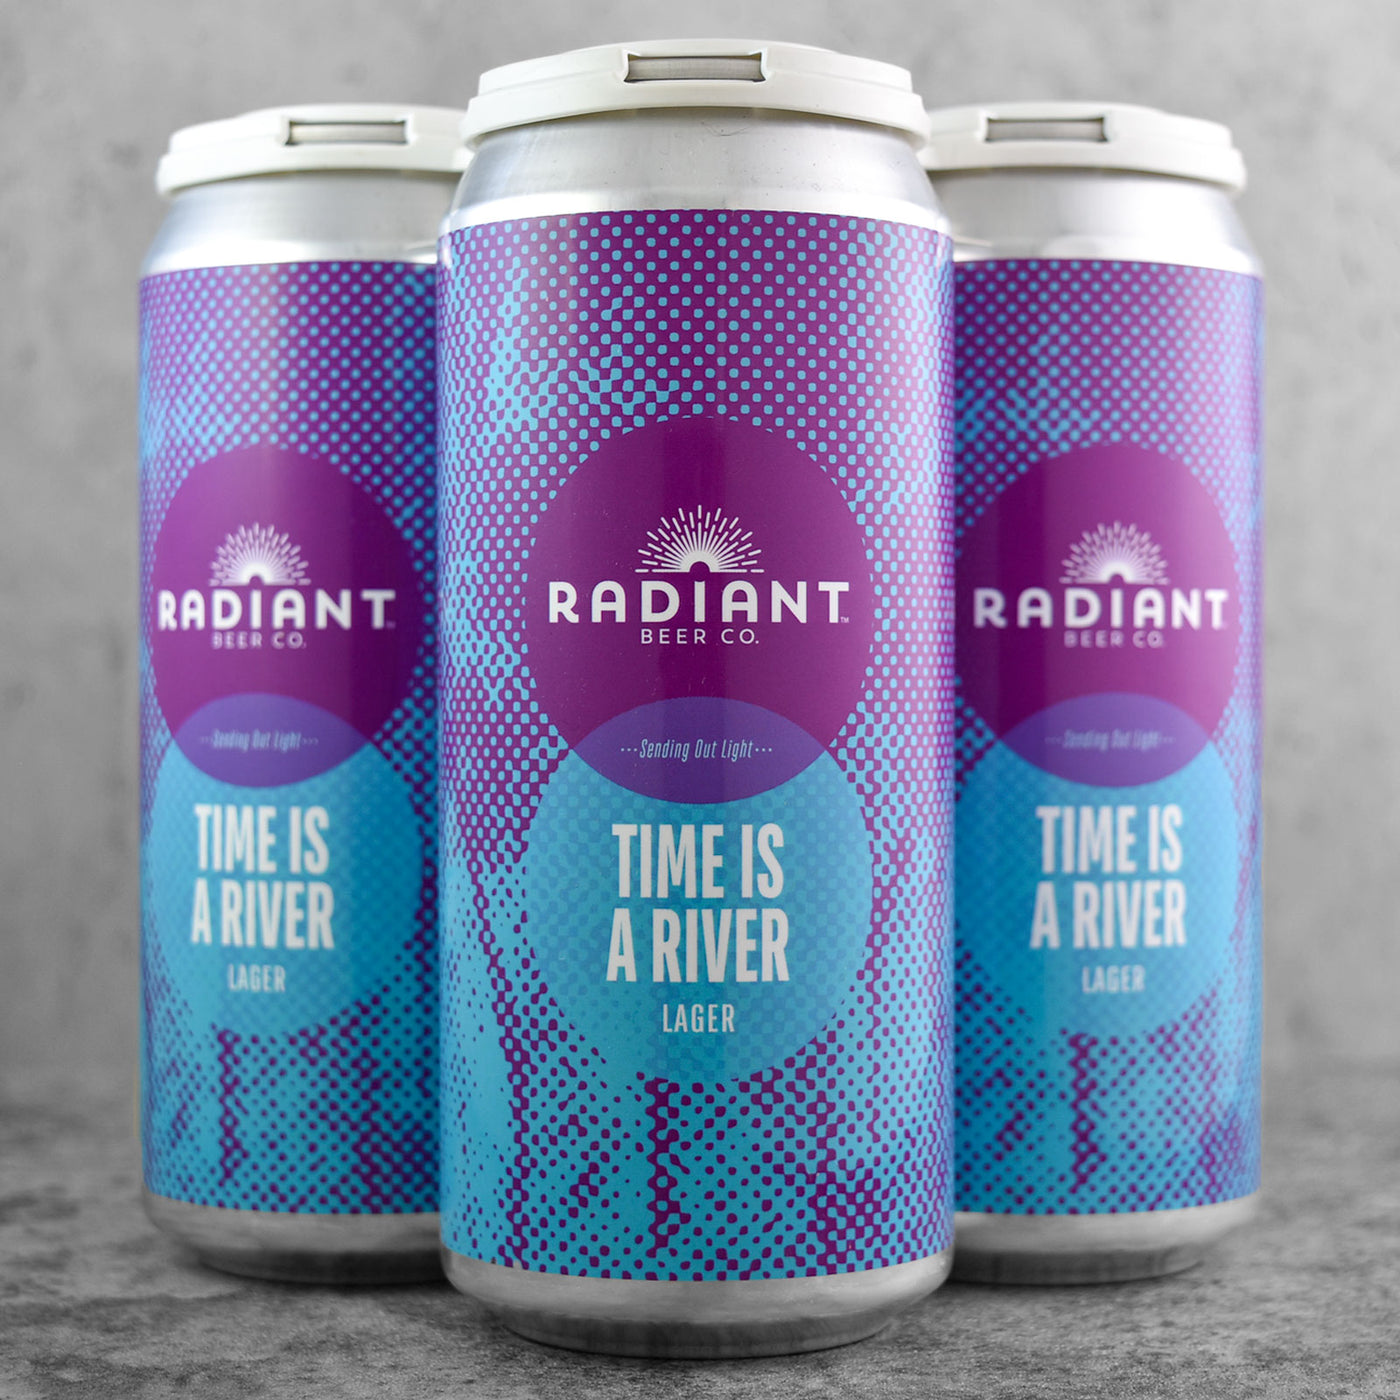 Radiant Beer Co. Time is a River